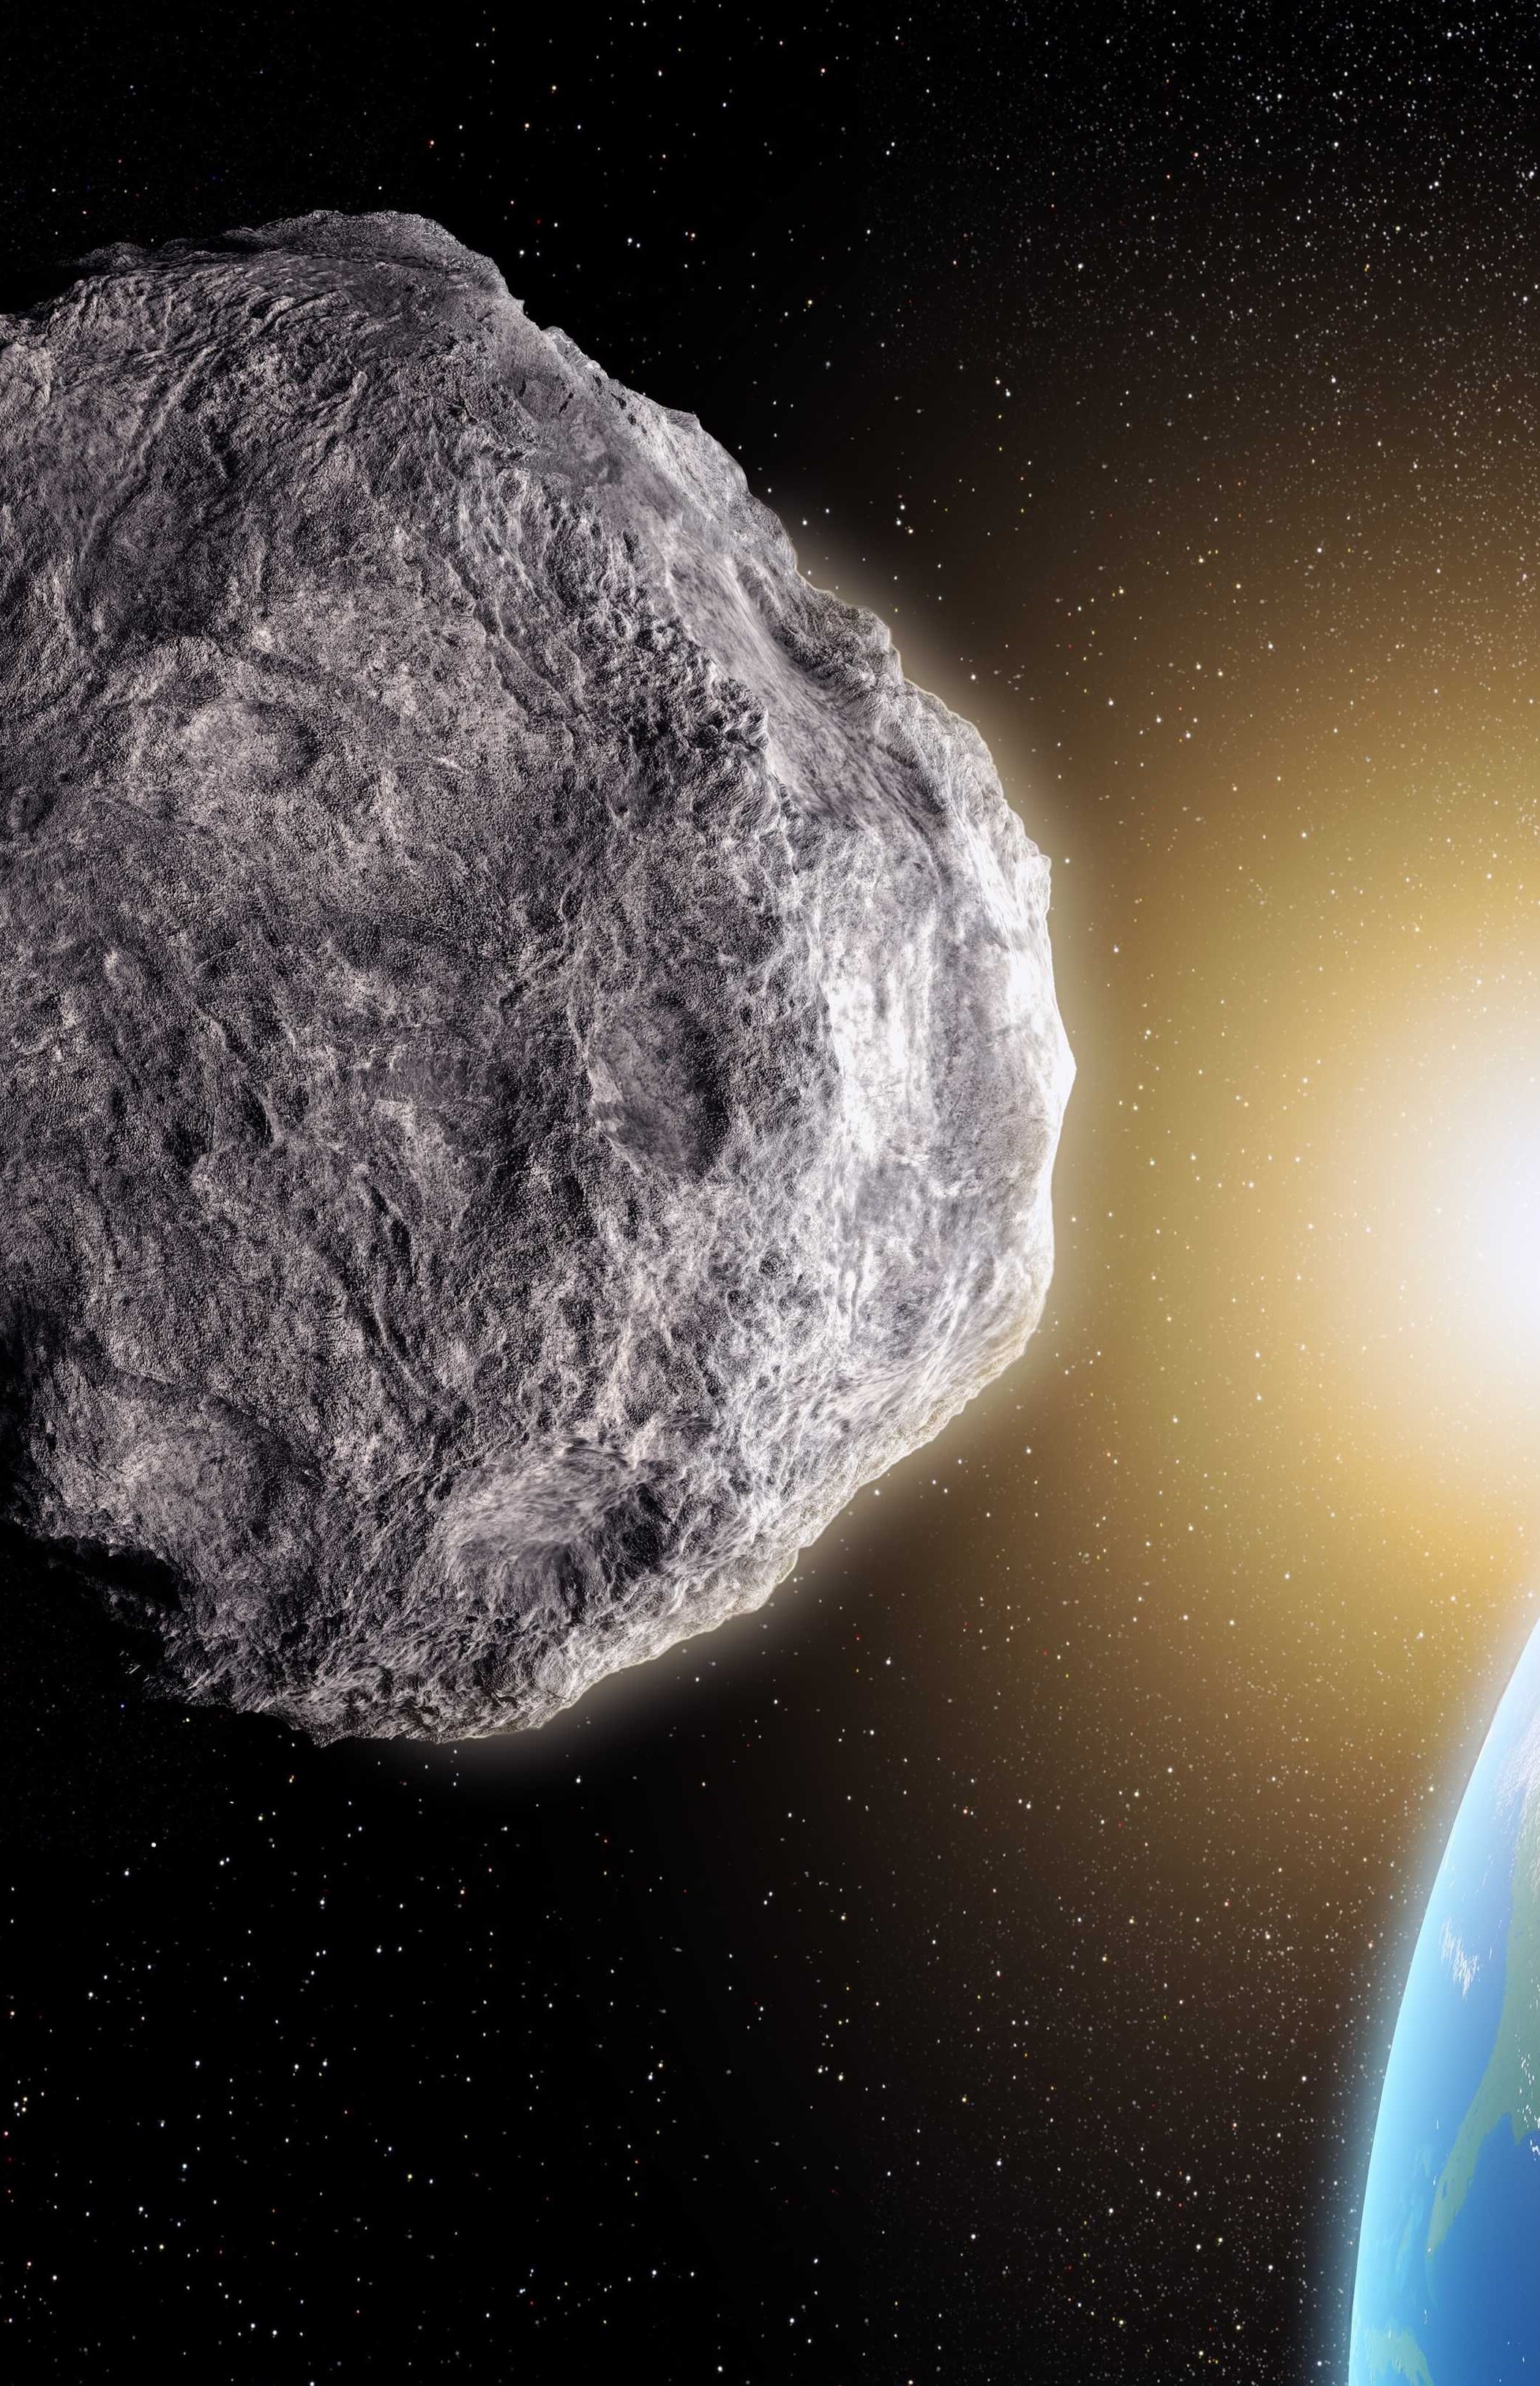 Nuking An Asteroid to Prevent It from Hitting Earth Could Actually Work, Study Shows